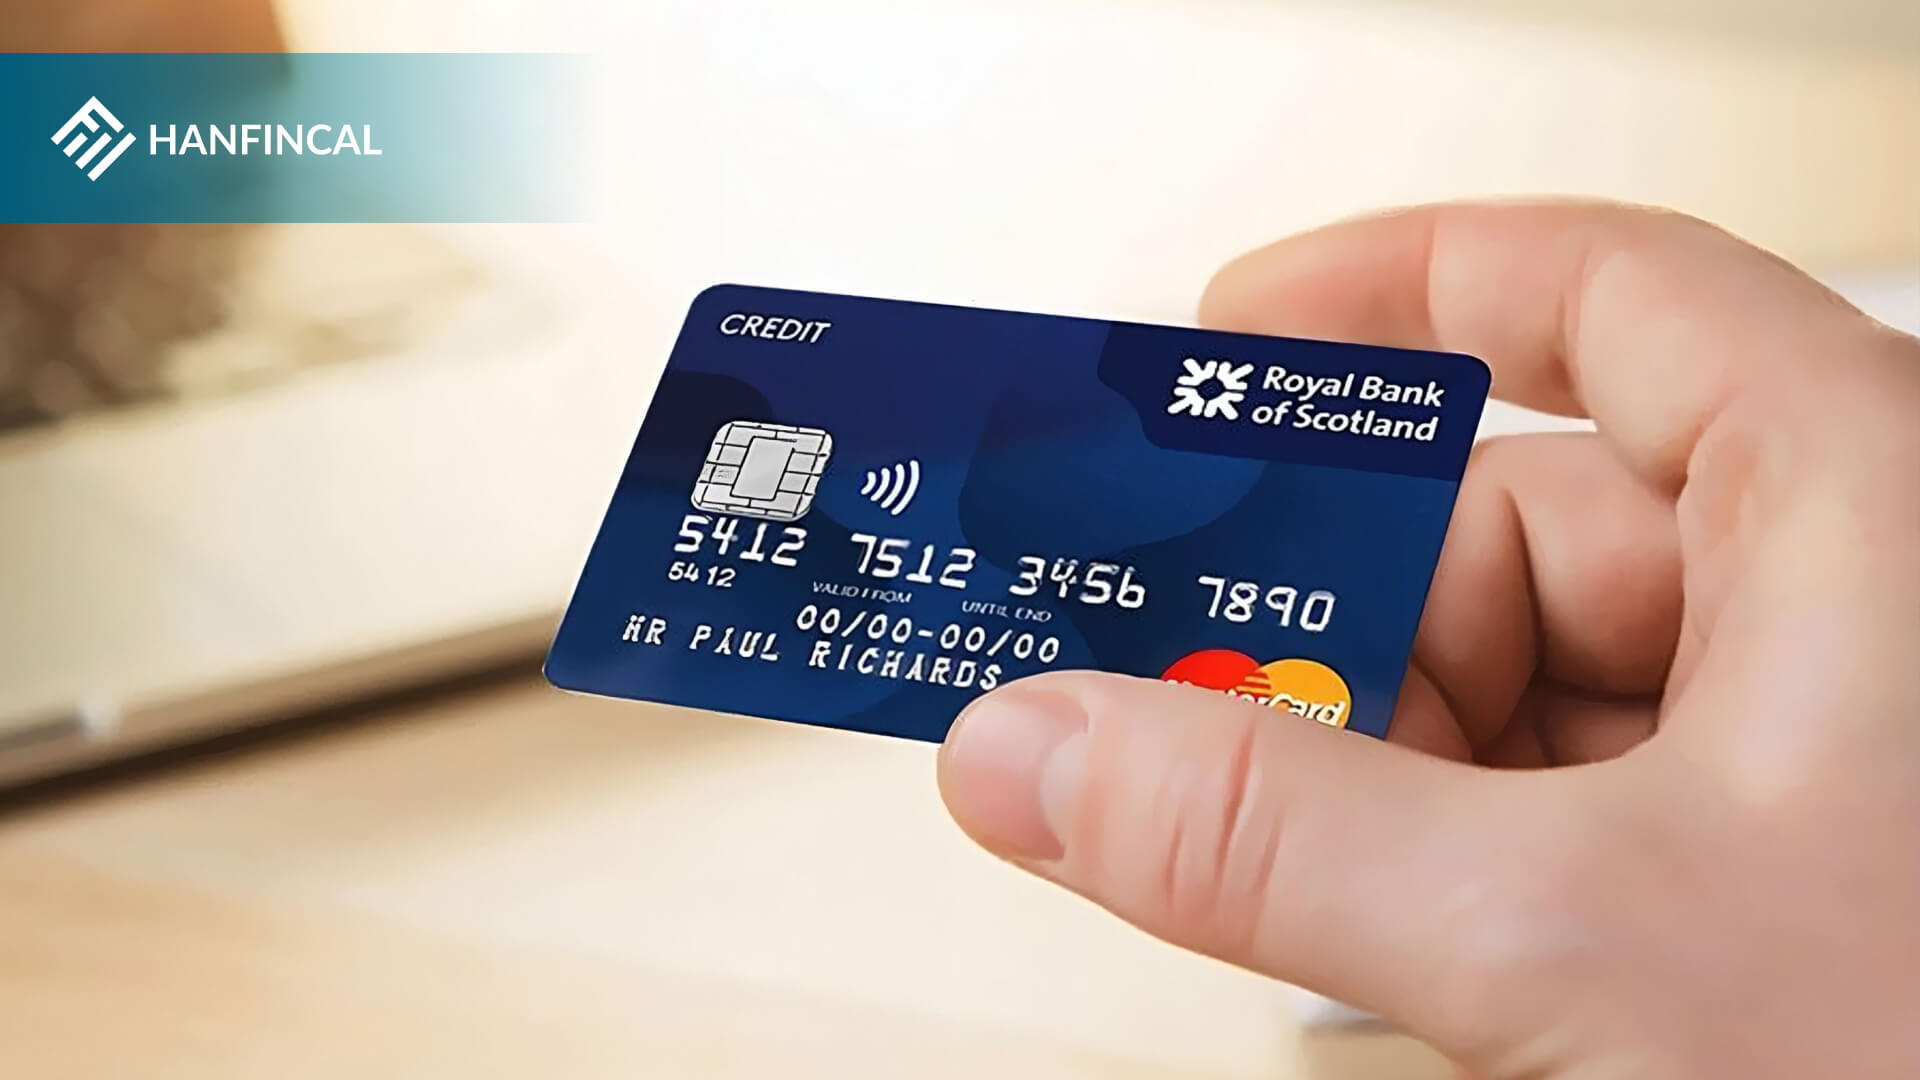 What is a credit card expiration date?